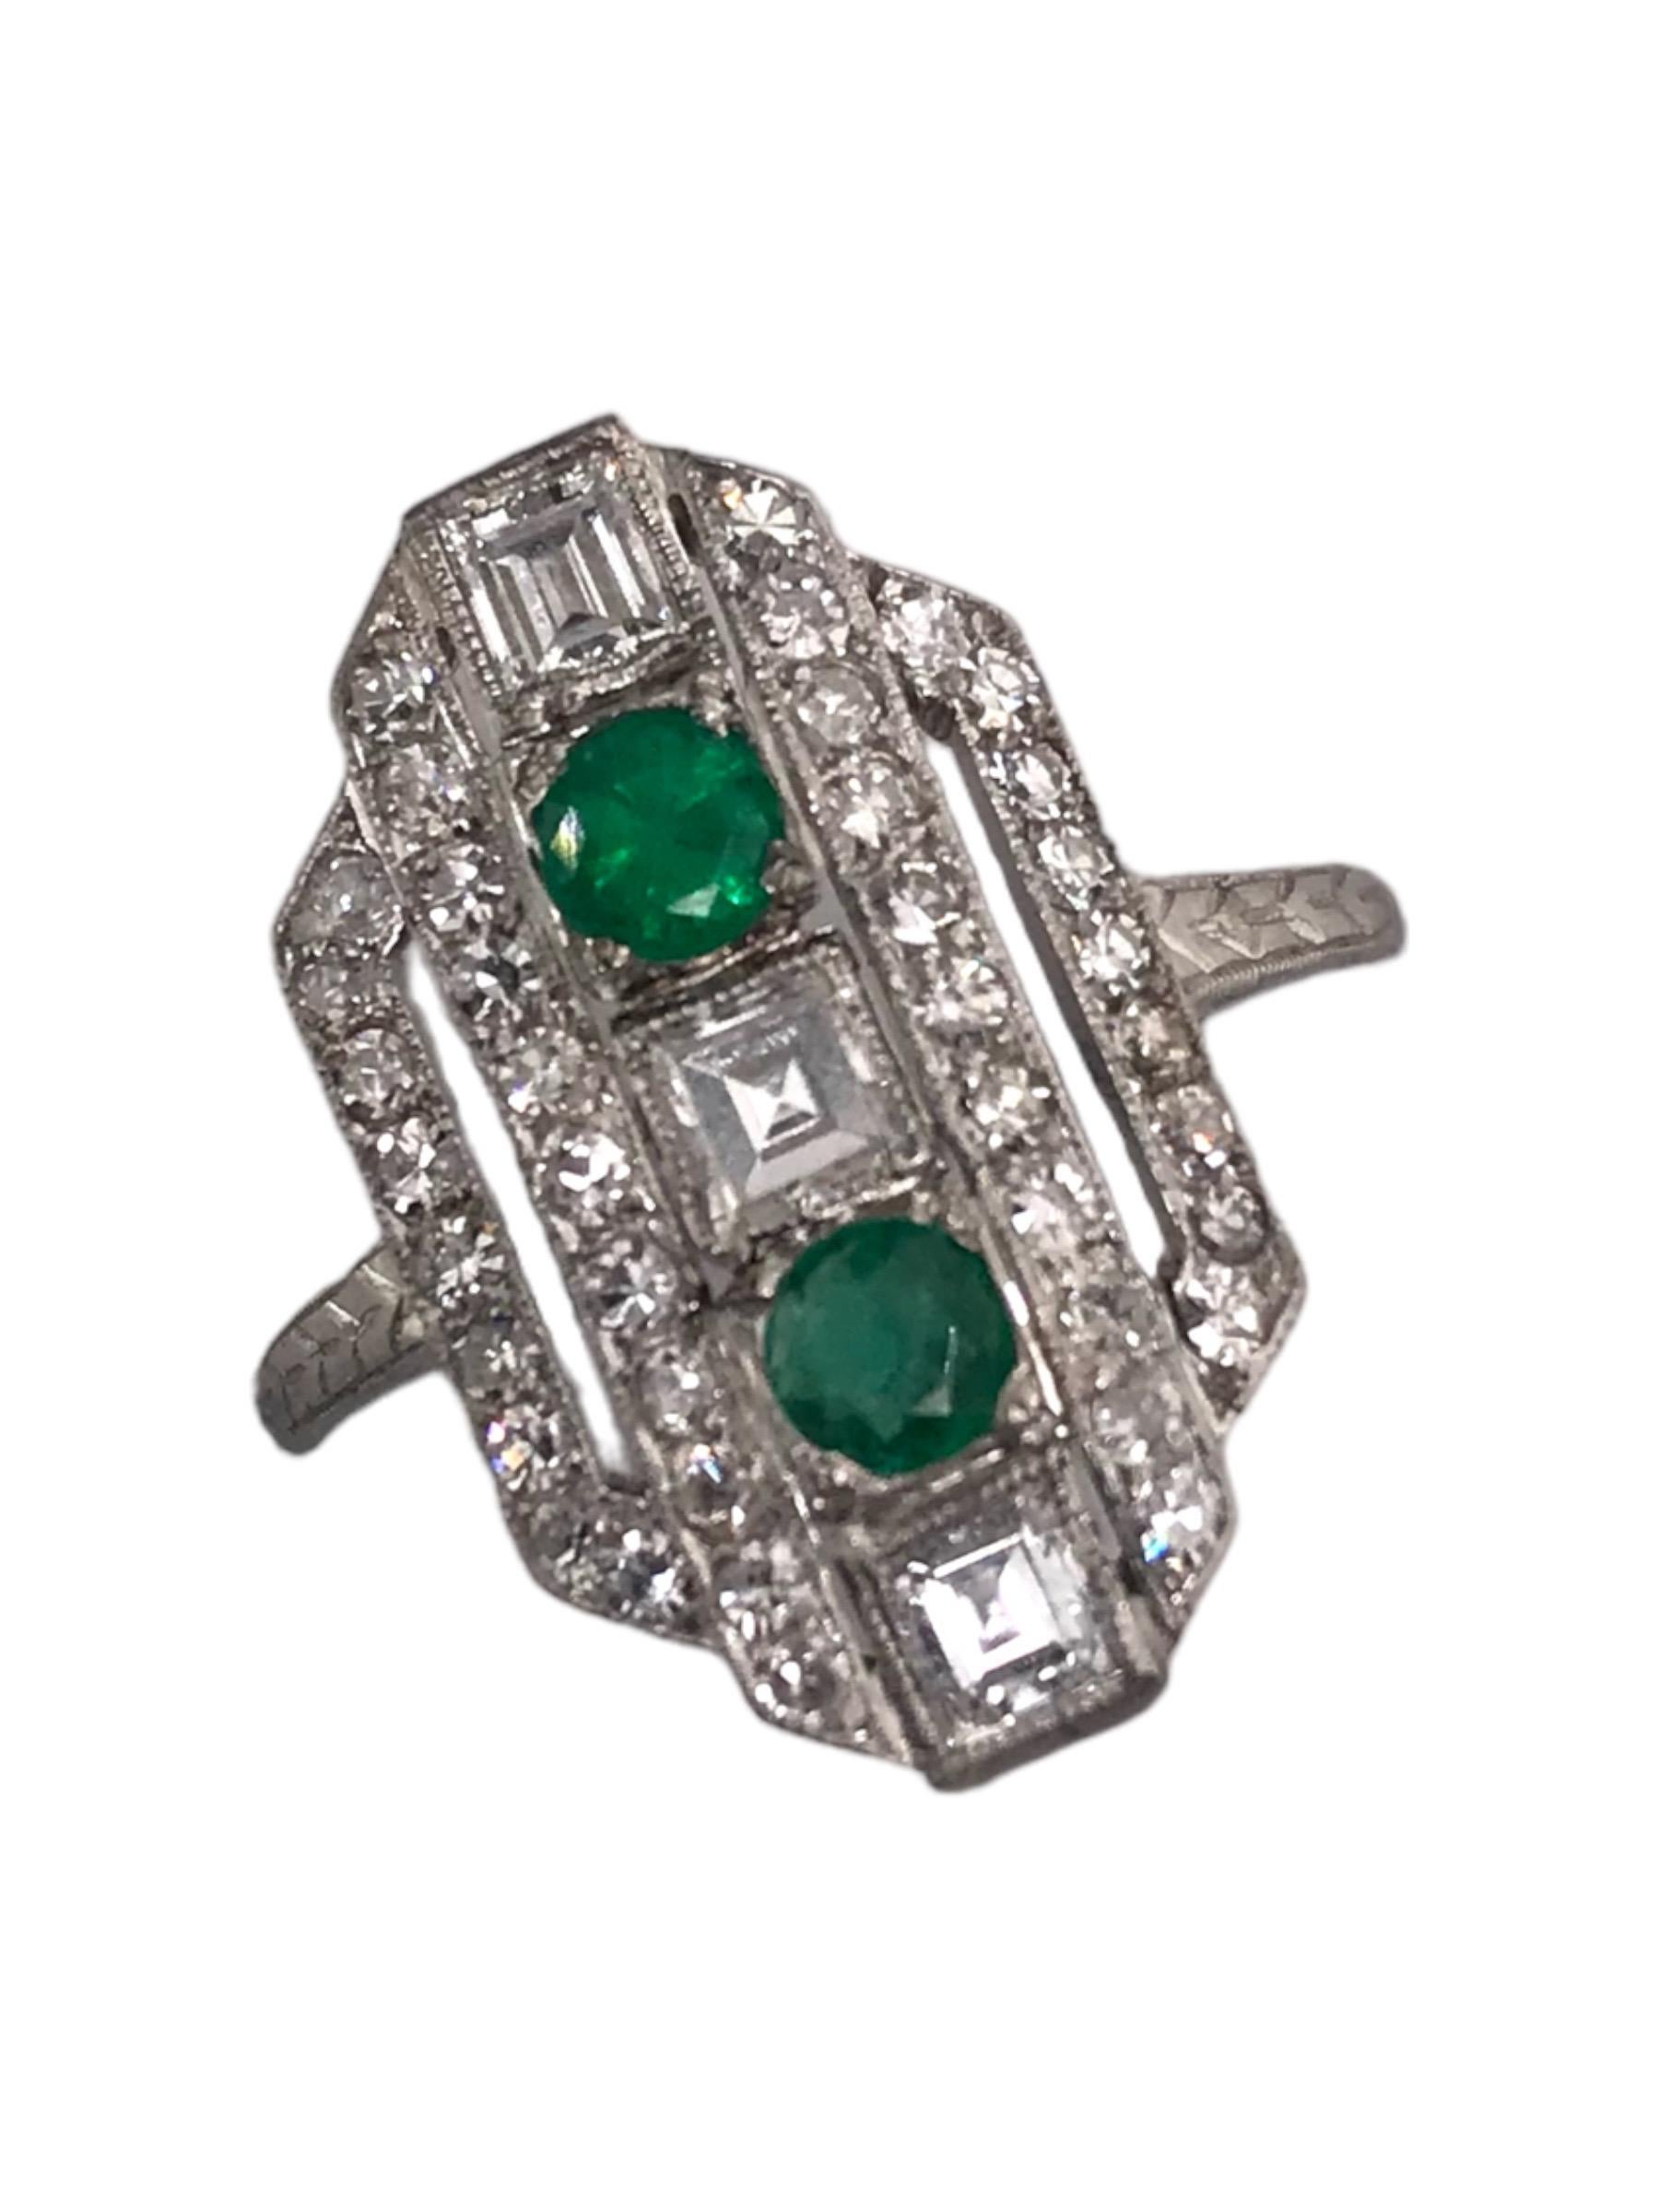 What a stunning combination! 
We absolutely love every bit of this unique Art Deco, 1920 - 1940, Cocktail Ring.

Accenting the ring are:
 3 - Carre Cut Diamonds; 0.2 Carat Each, FG Color, VS1 Clarity
2 - Round Natural Emerald Gemstones; 3.25mm